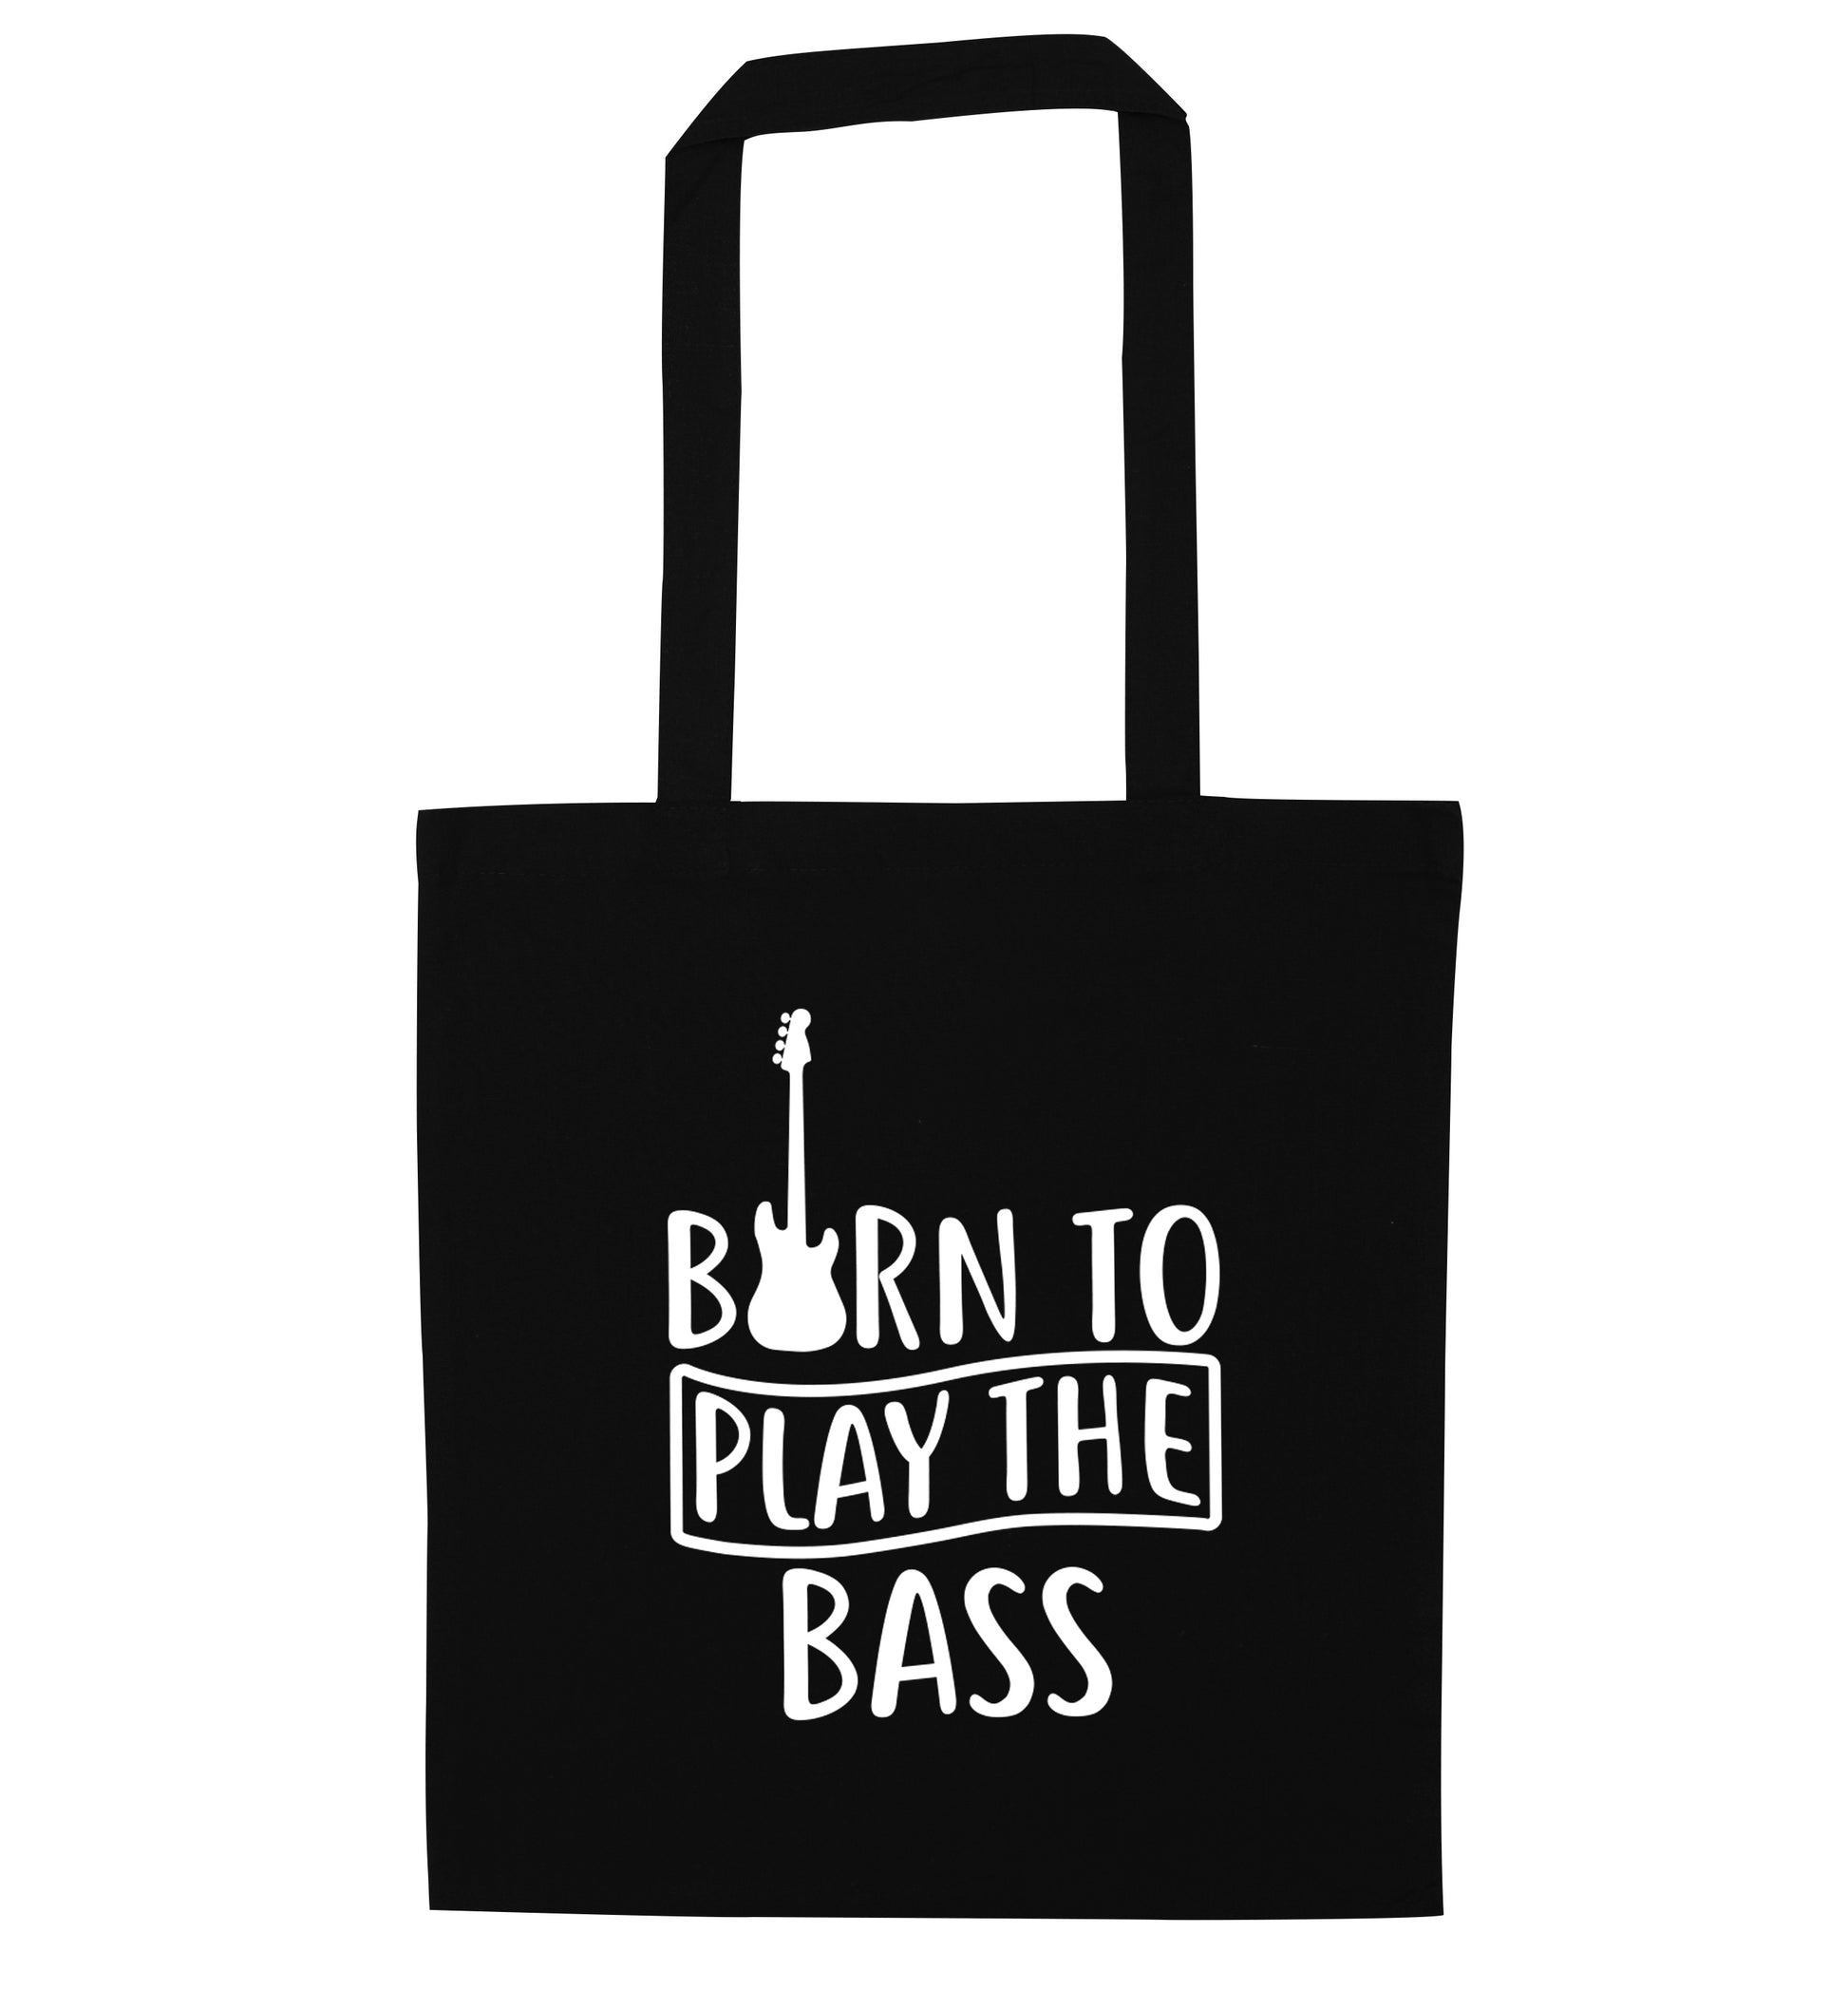 Born to play the bass black tote bag